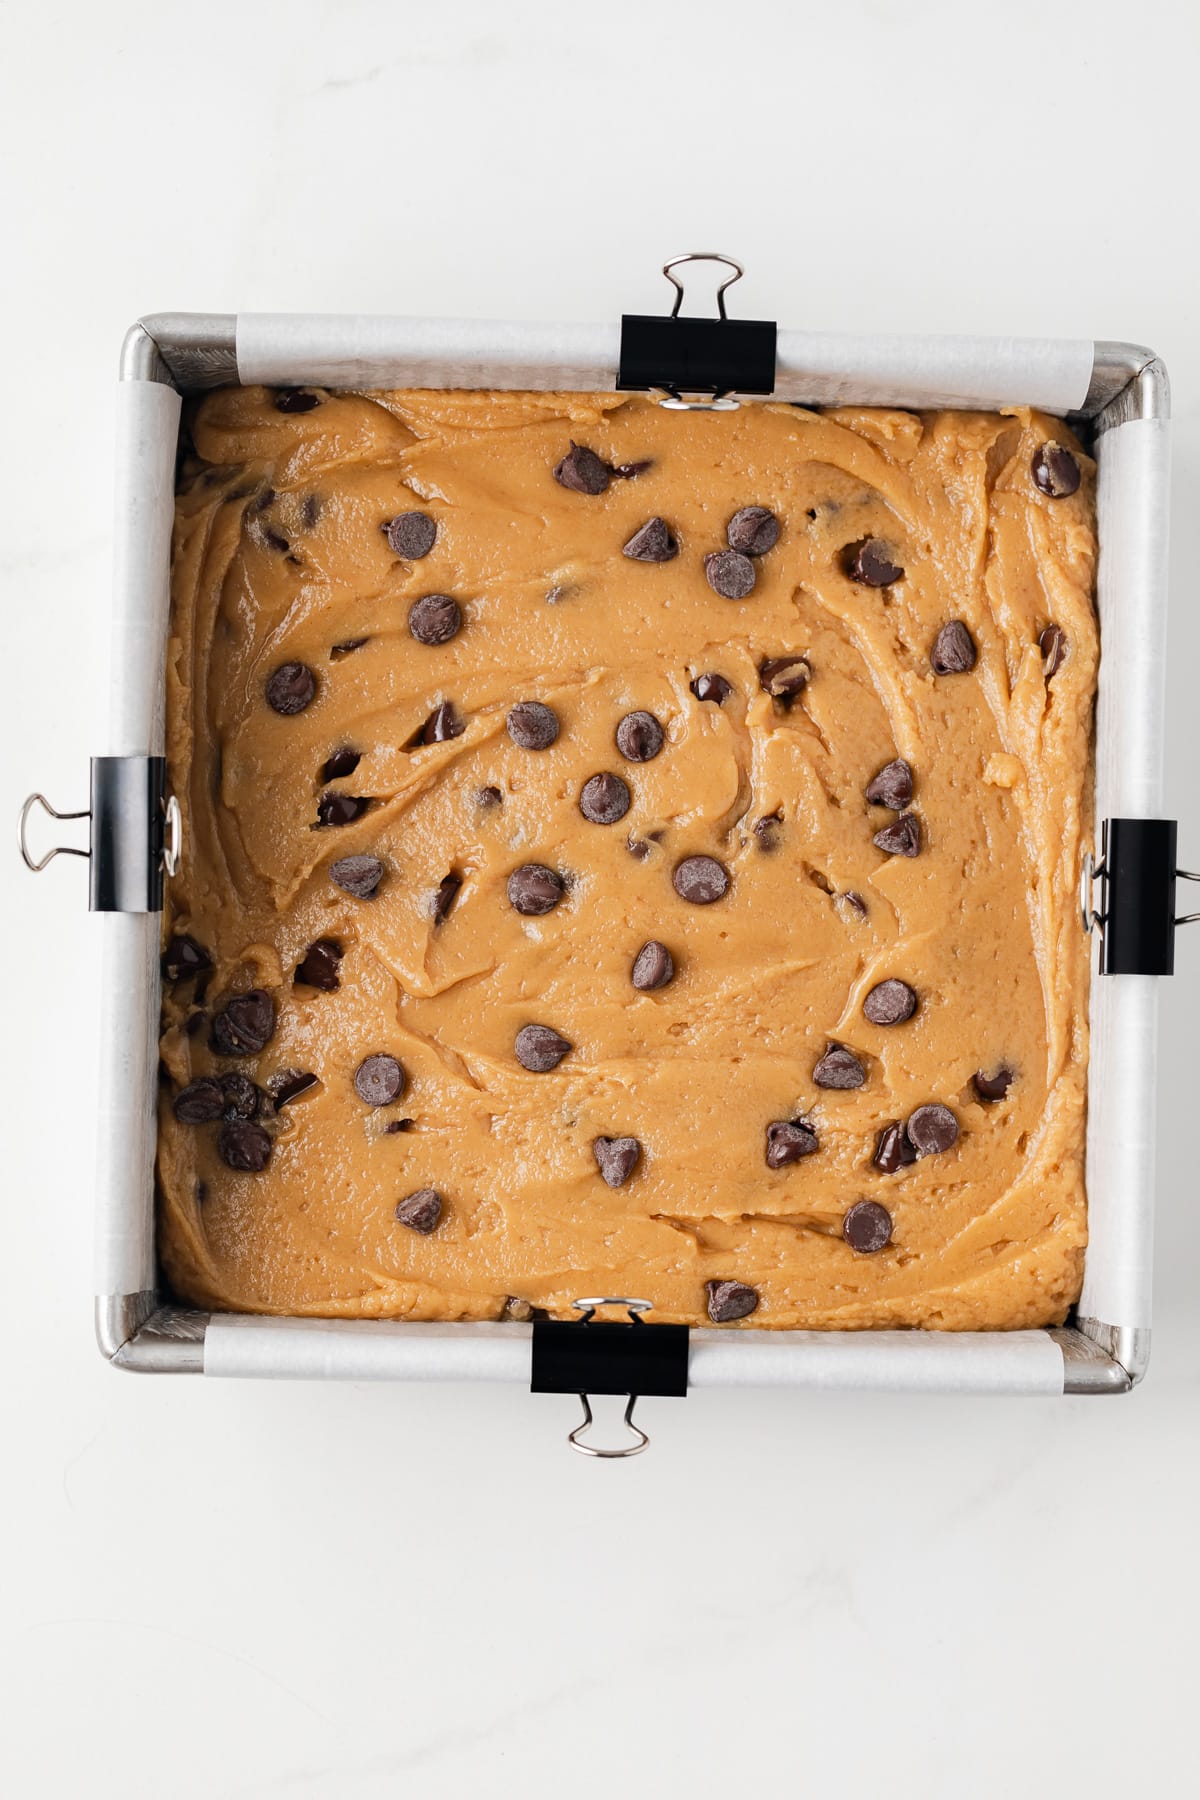 Unbaked peanut butter chocolate chip blondies in square baking pan.